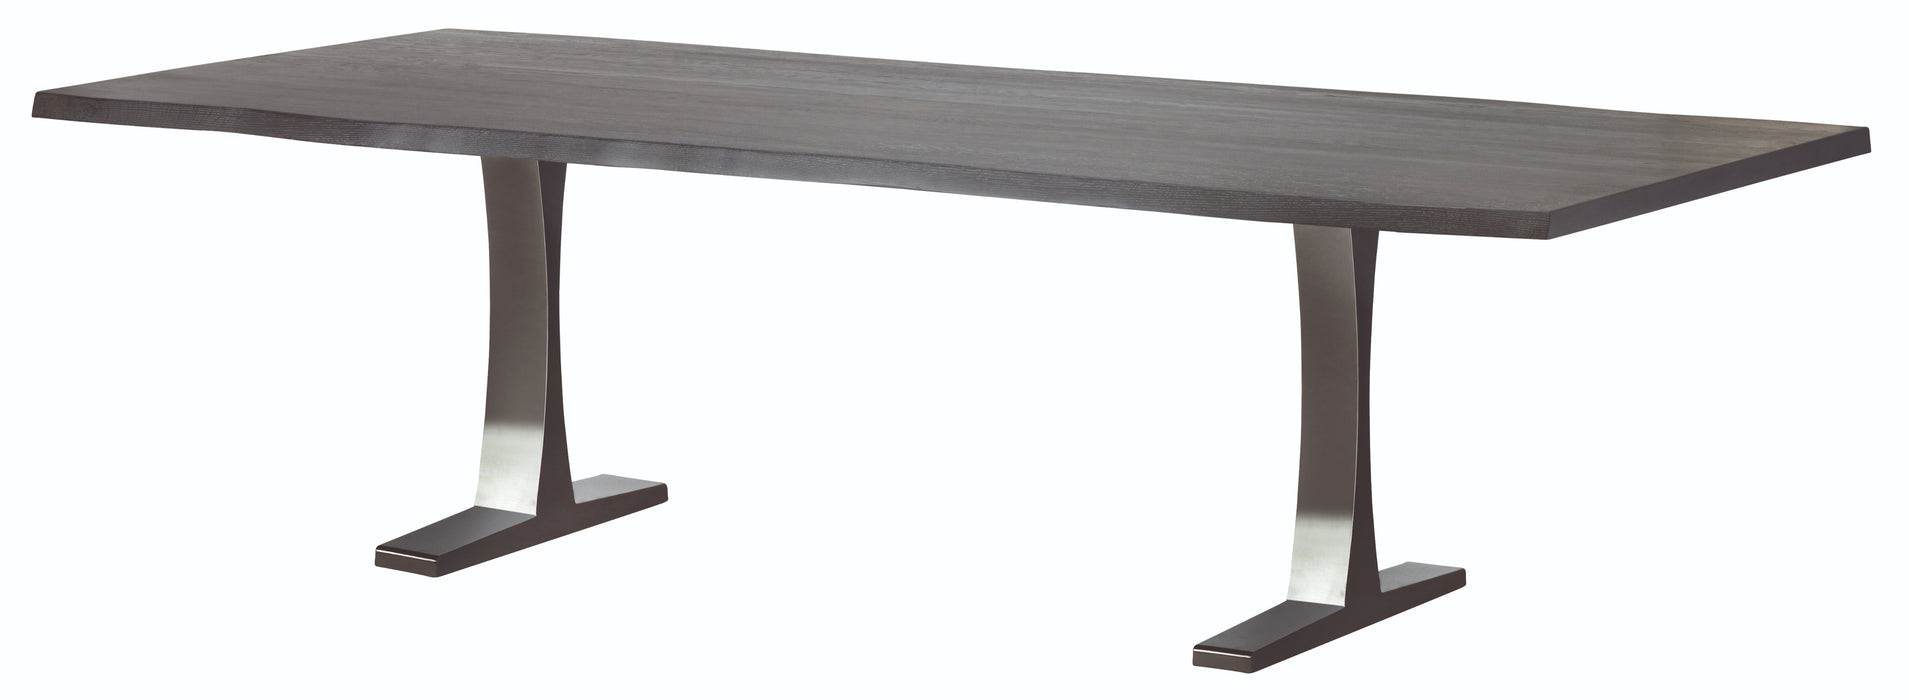 Toulouse NL Oxidized Grey Dining Table